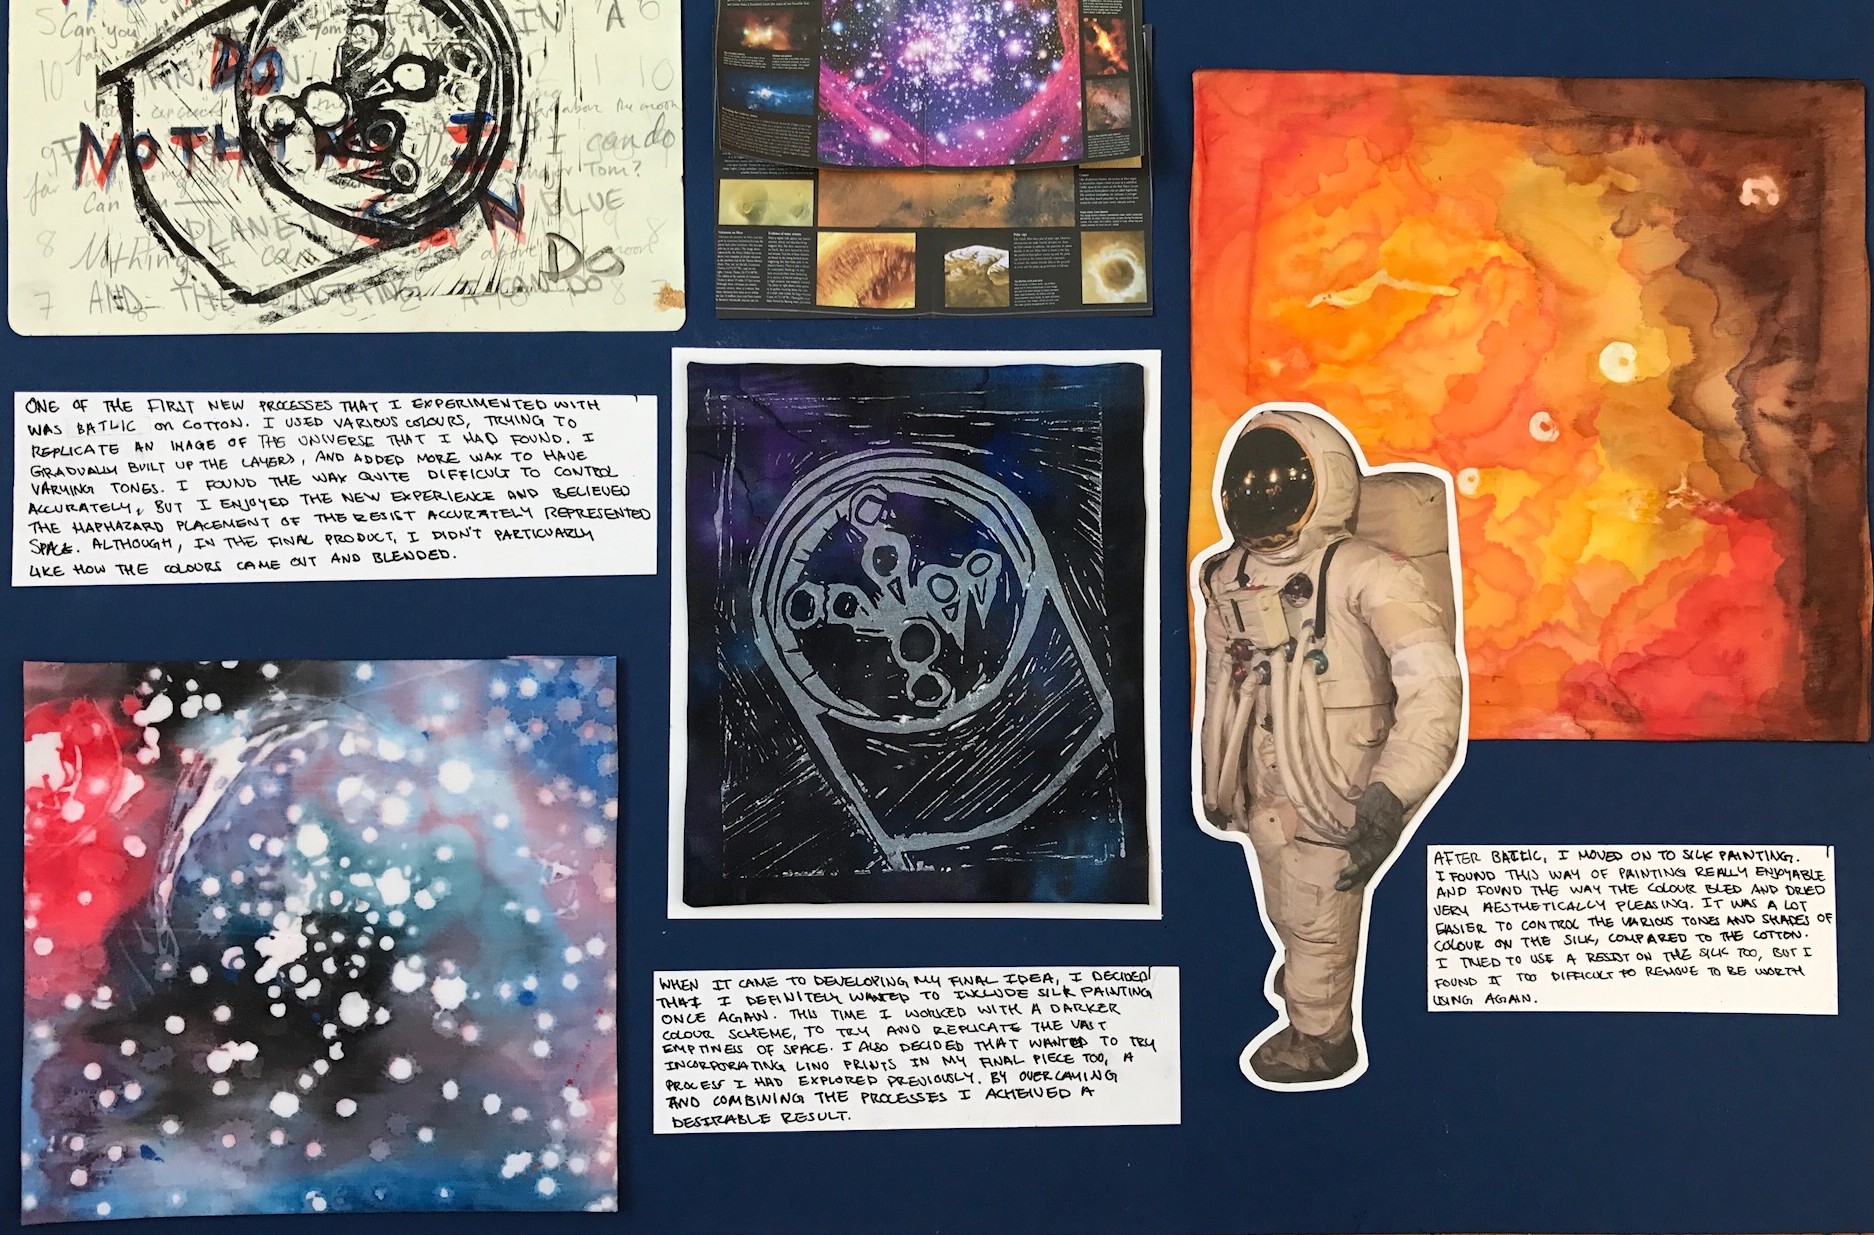 a personal journey in art education igcse